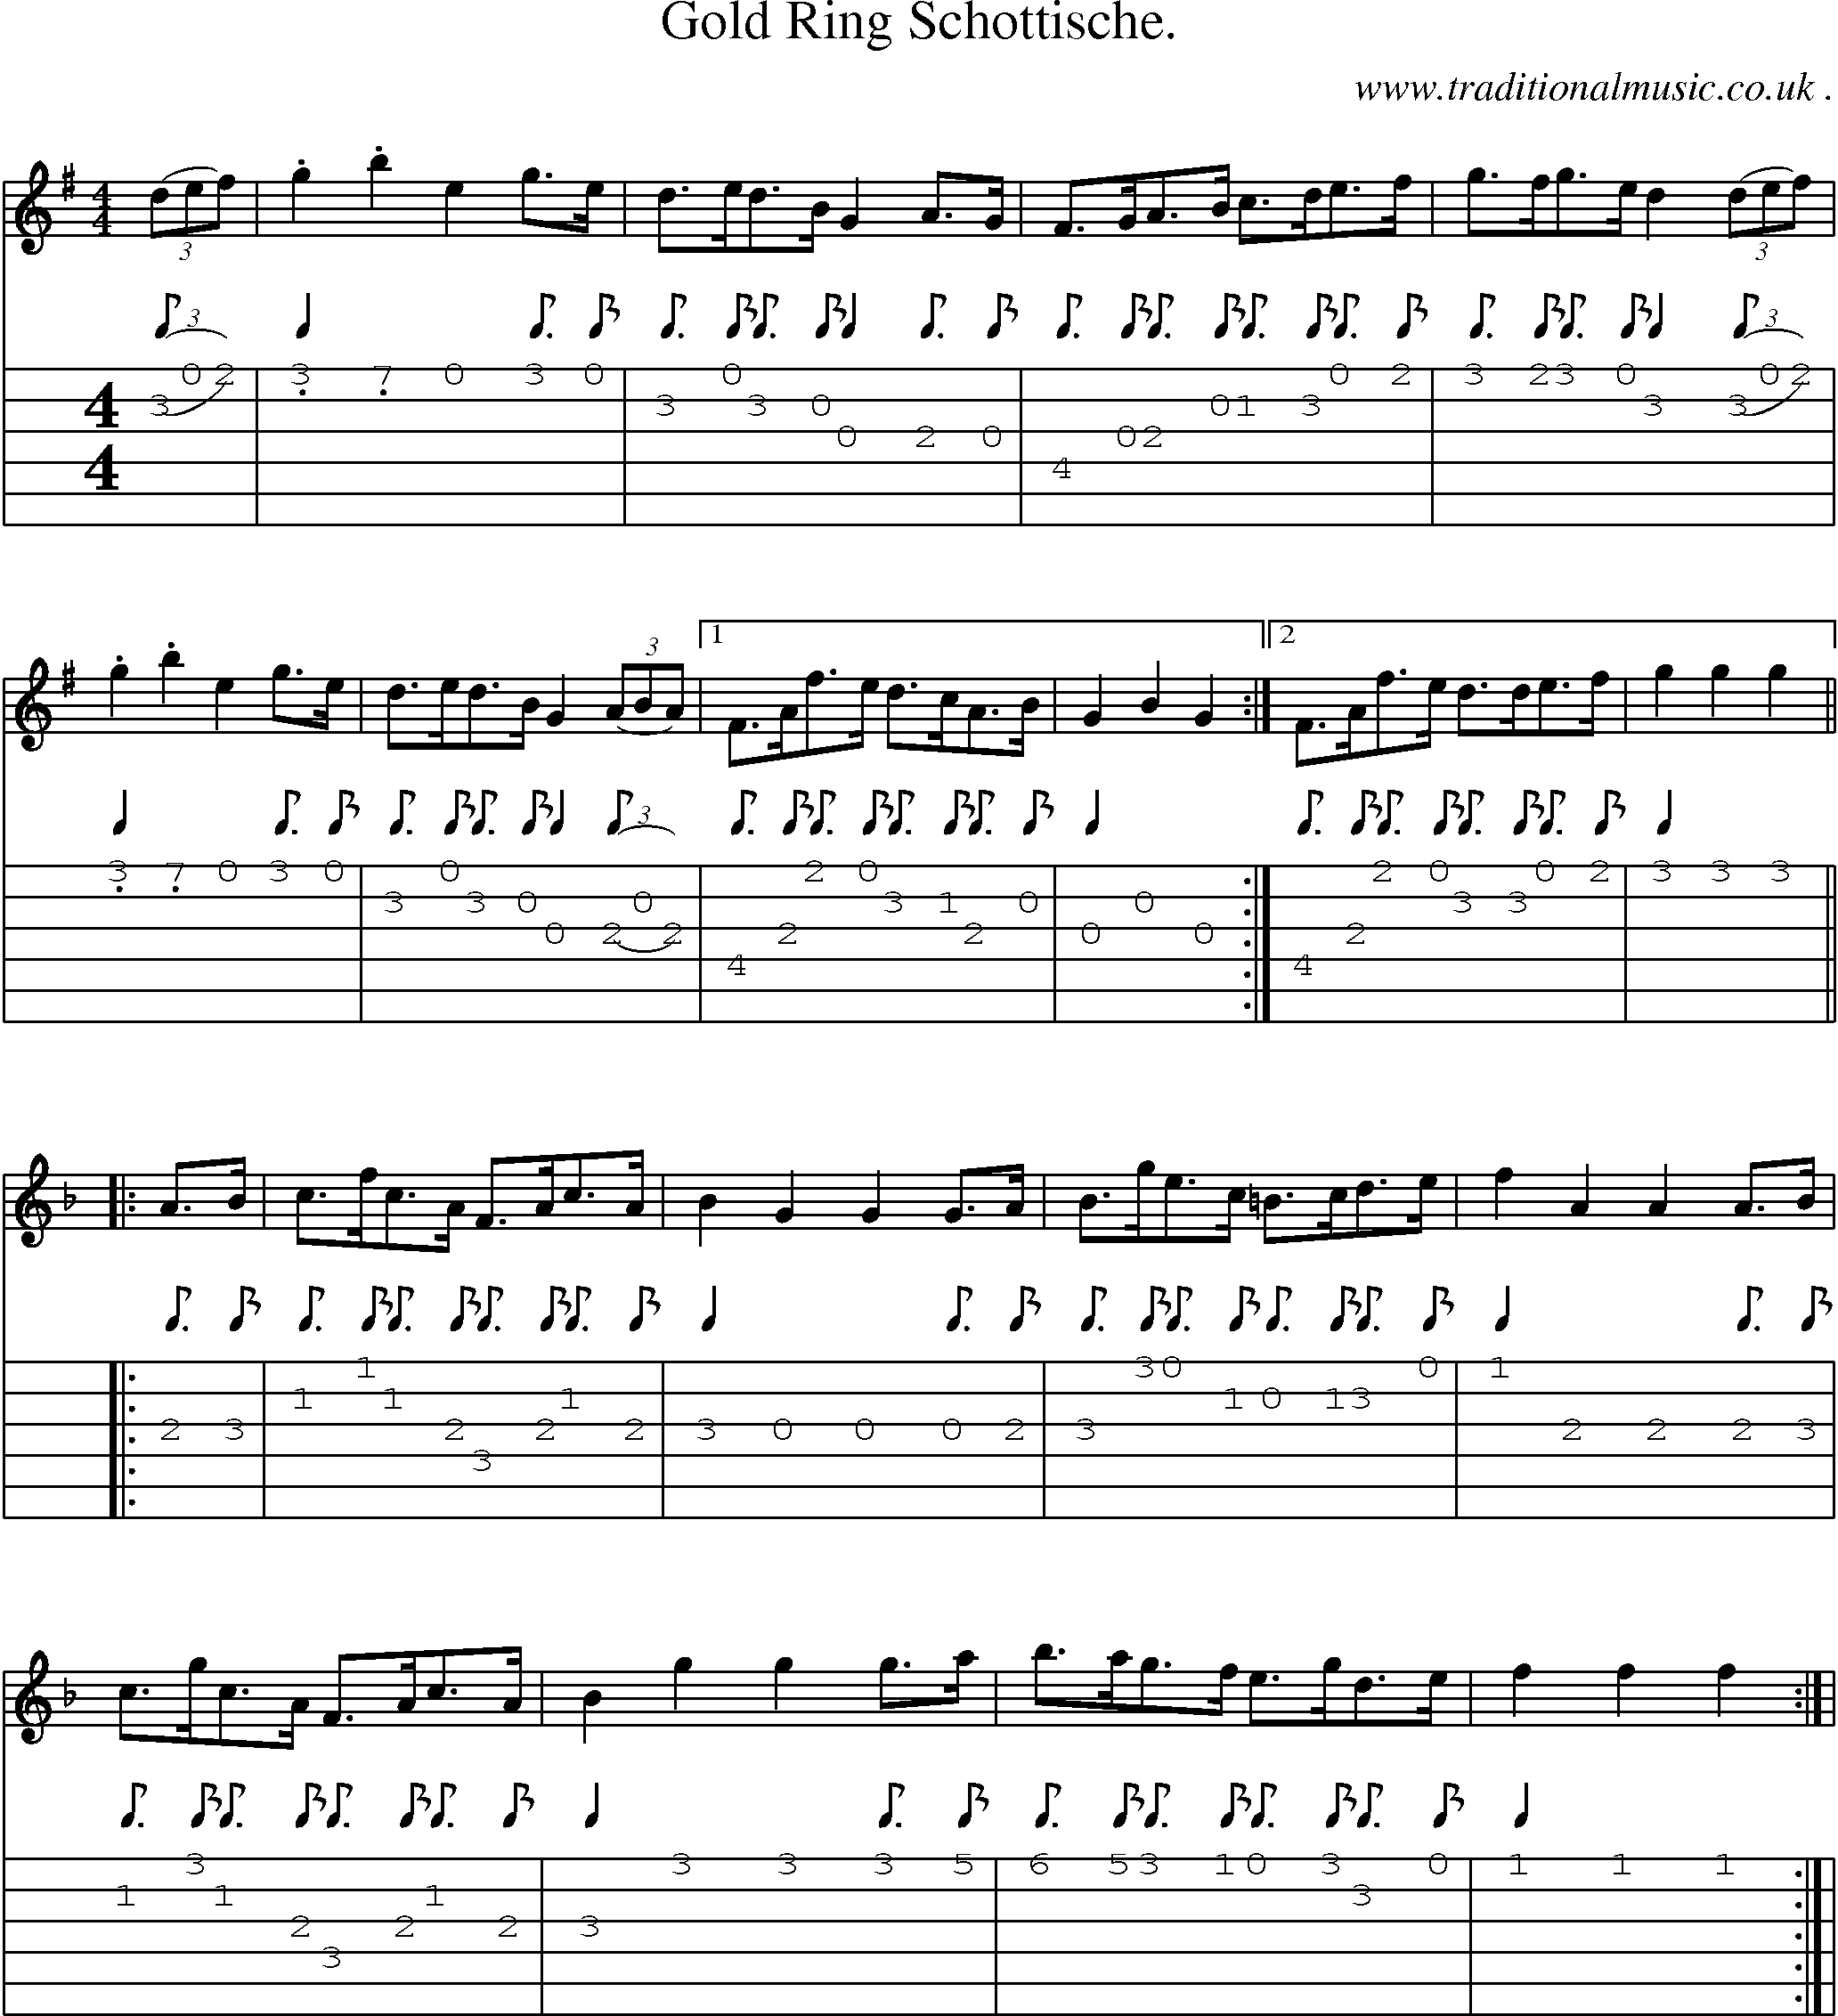 Sheet-Music and Guitar Tabs for Gold Ring Schottische